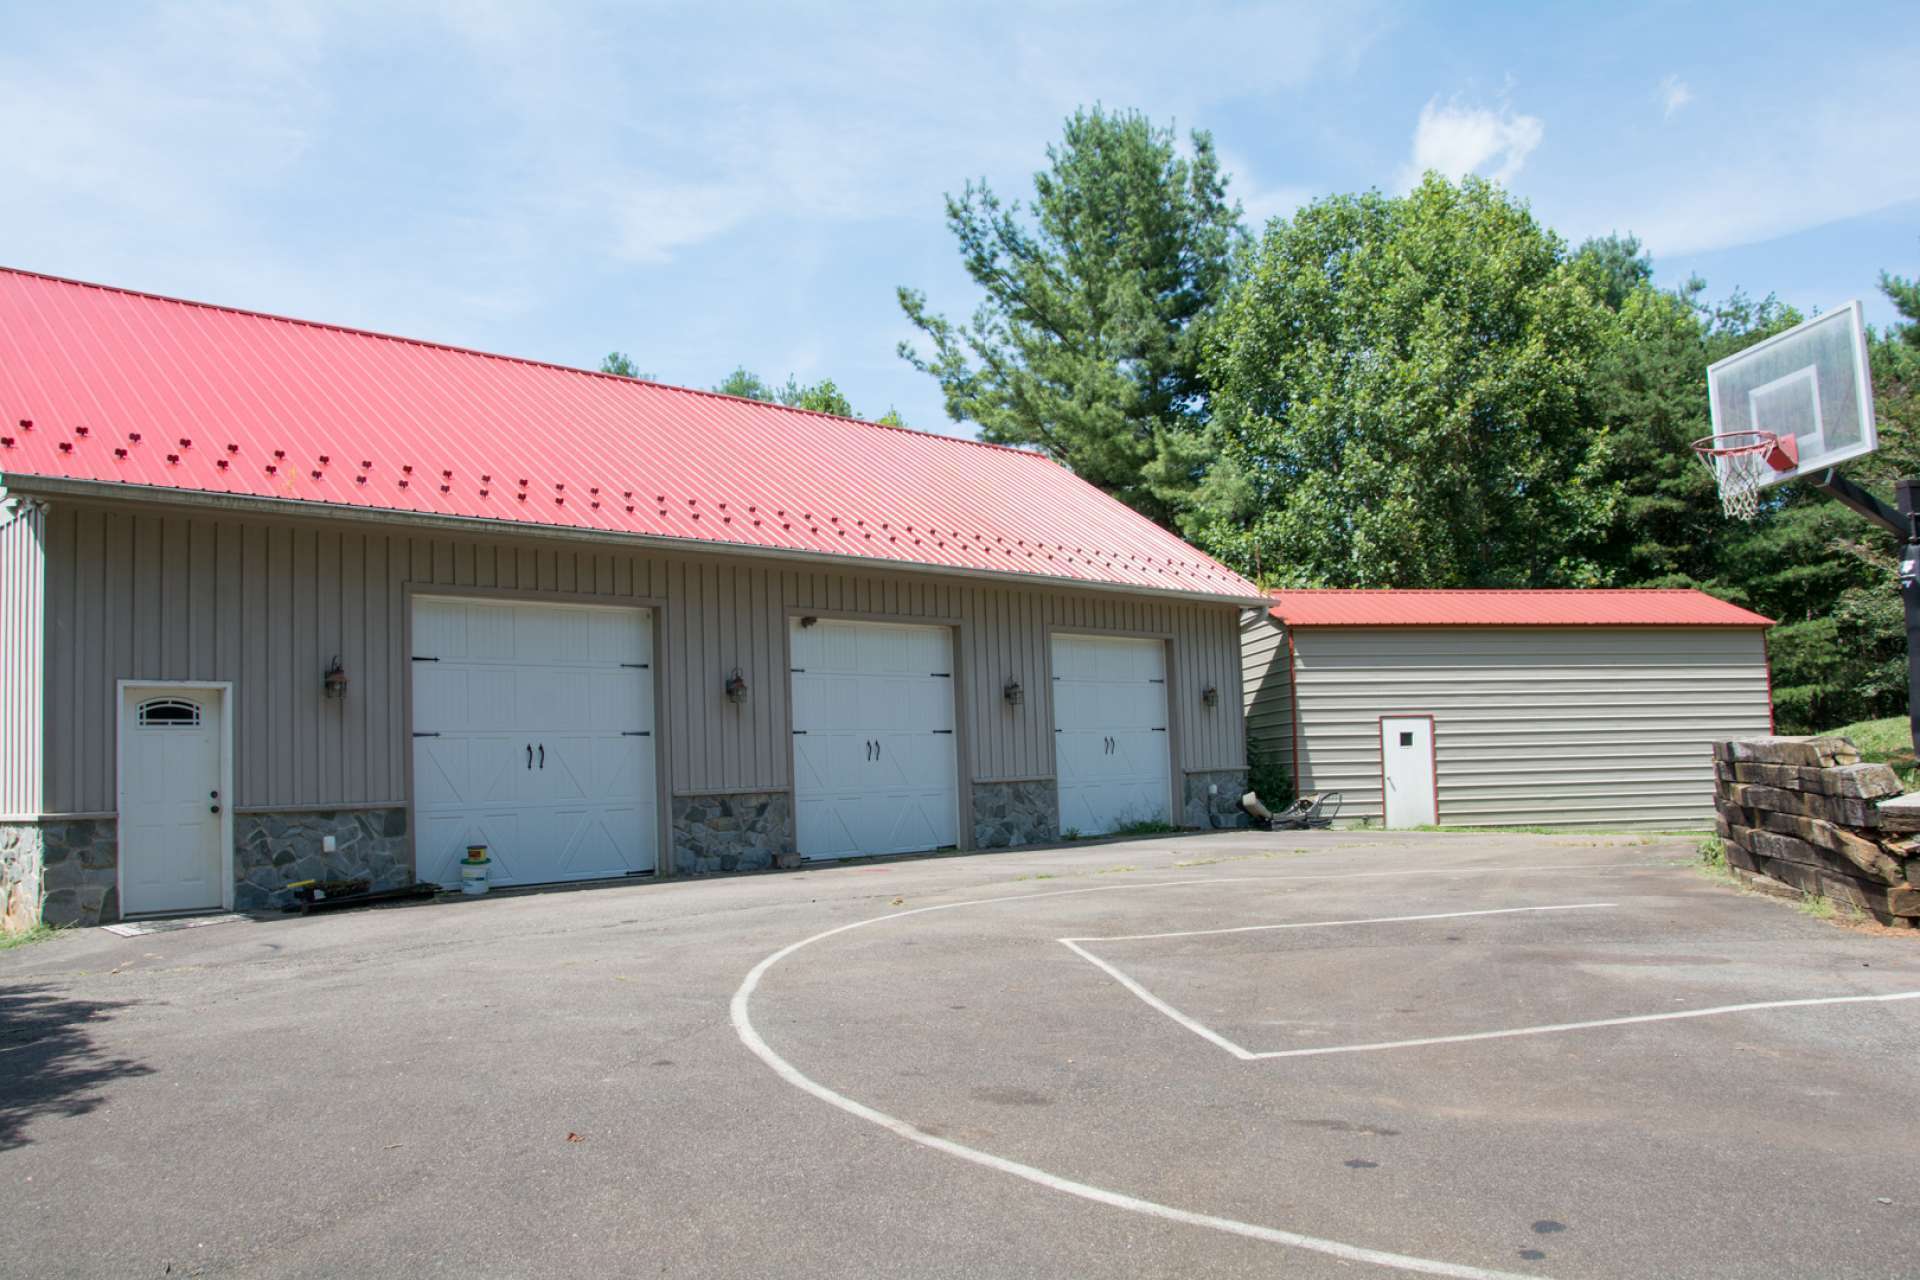 This 1,800 square foot detached heated 3-car garage provides plenty of protective coverage for your vehicles. Another 450 sq. ft. metal building provides additional storage space. There is another detached outbuilding with 2 garage bays.